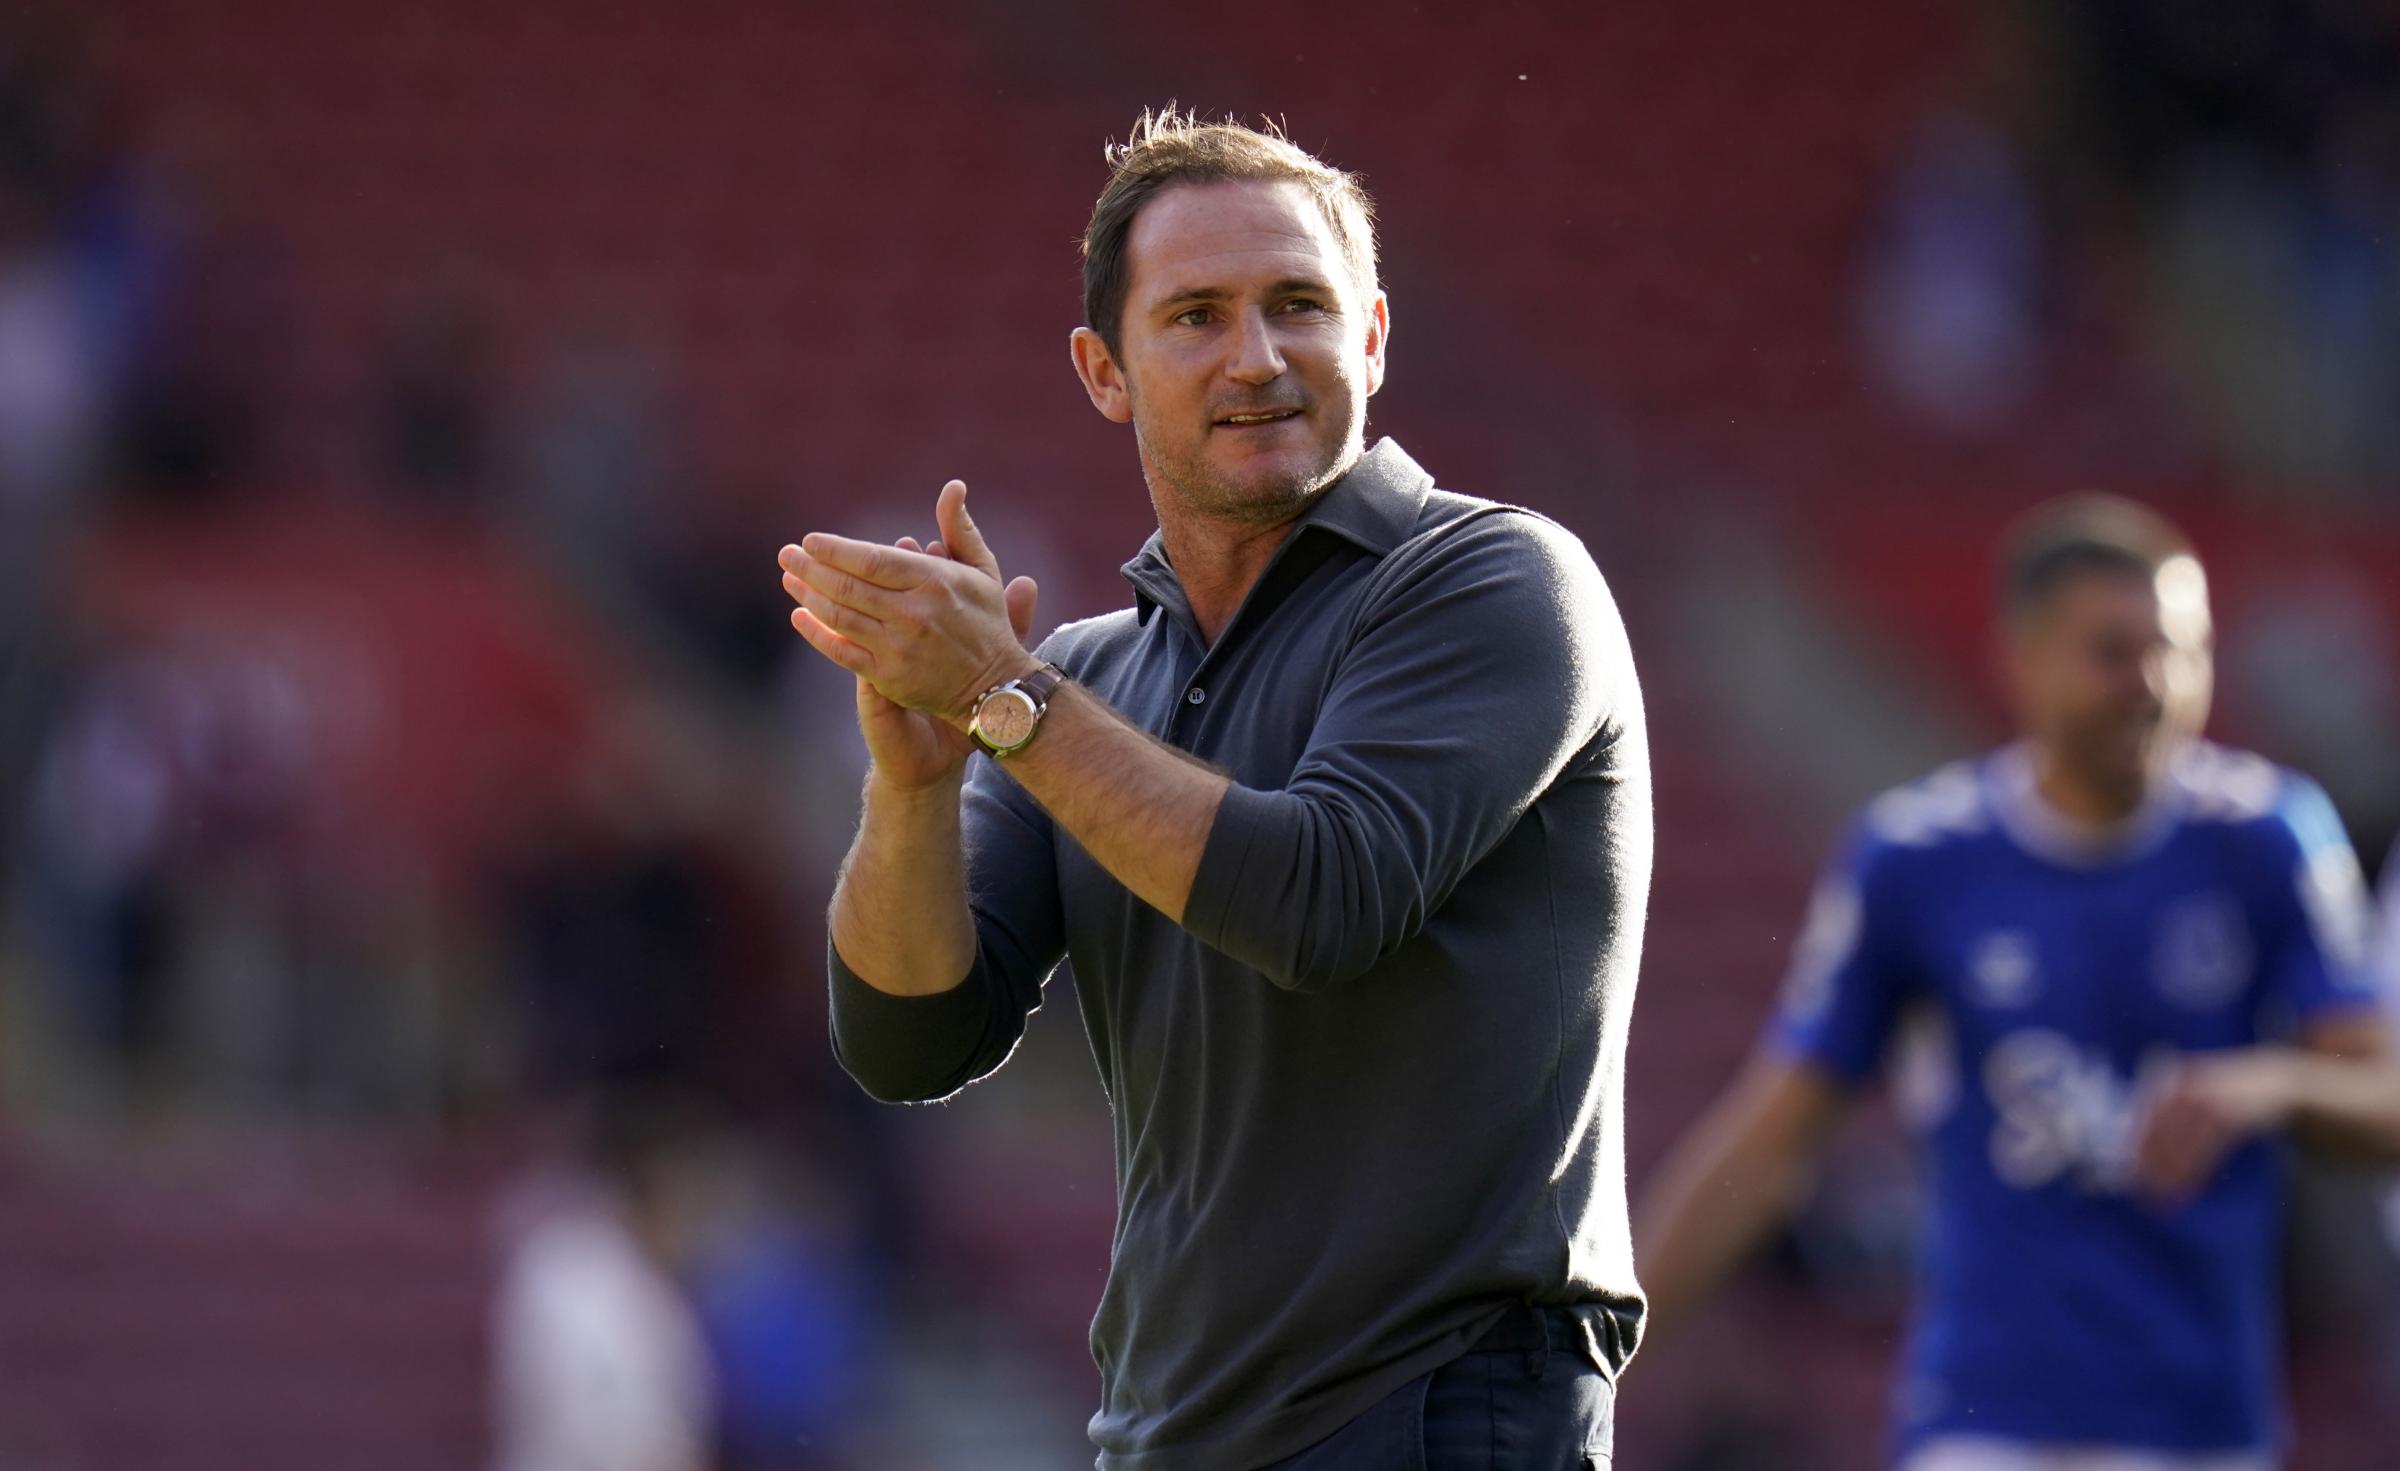 Lampard admits making last-minute tactical changes to beat Hasenhuttl's team